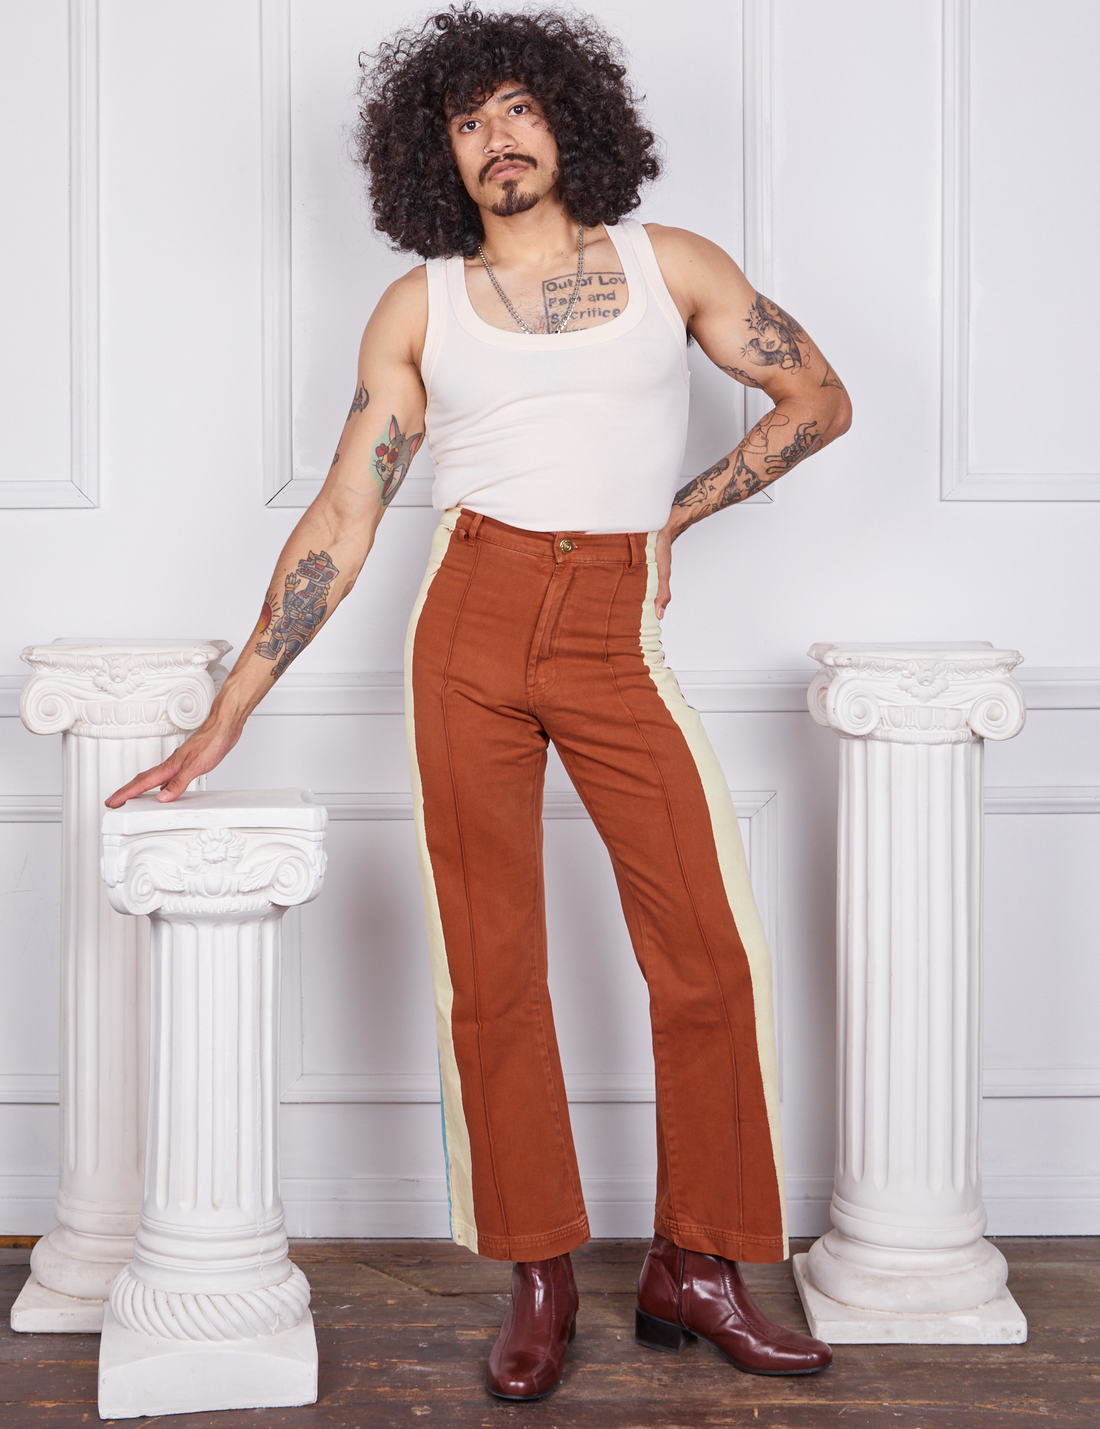 Jesse is 5'8" and wearing XS Hand-Painted Stripe Western Pants in Burnt Terracotta paired with a vintage off-white Tank Top